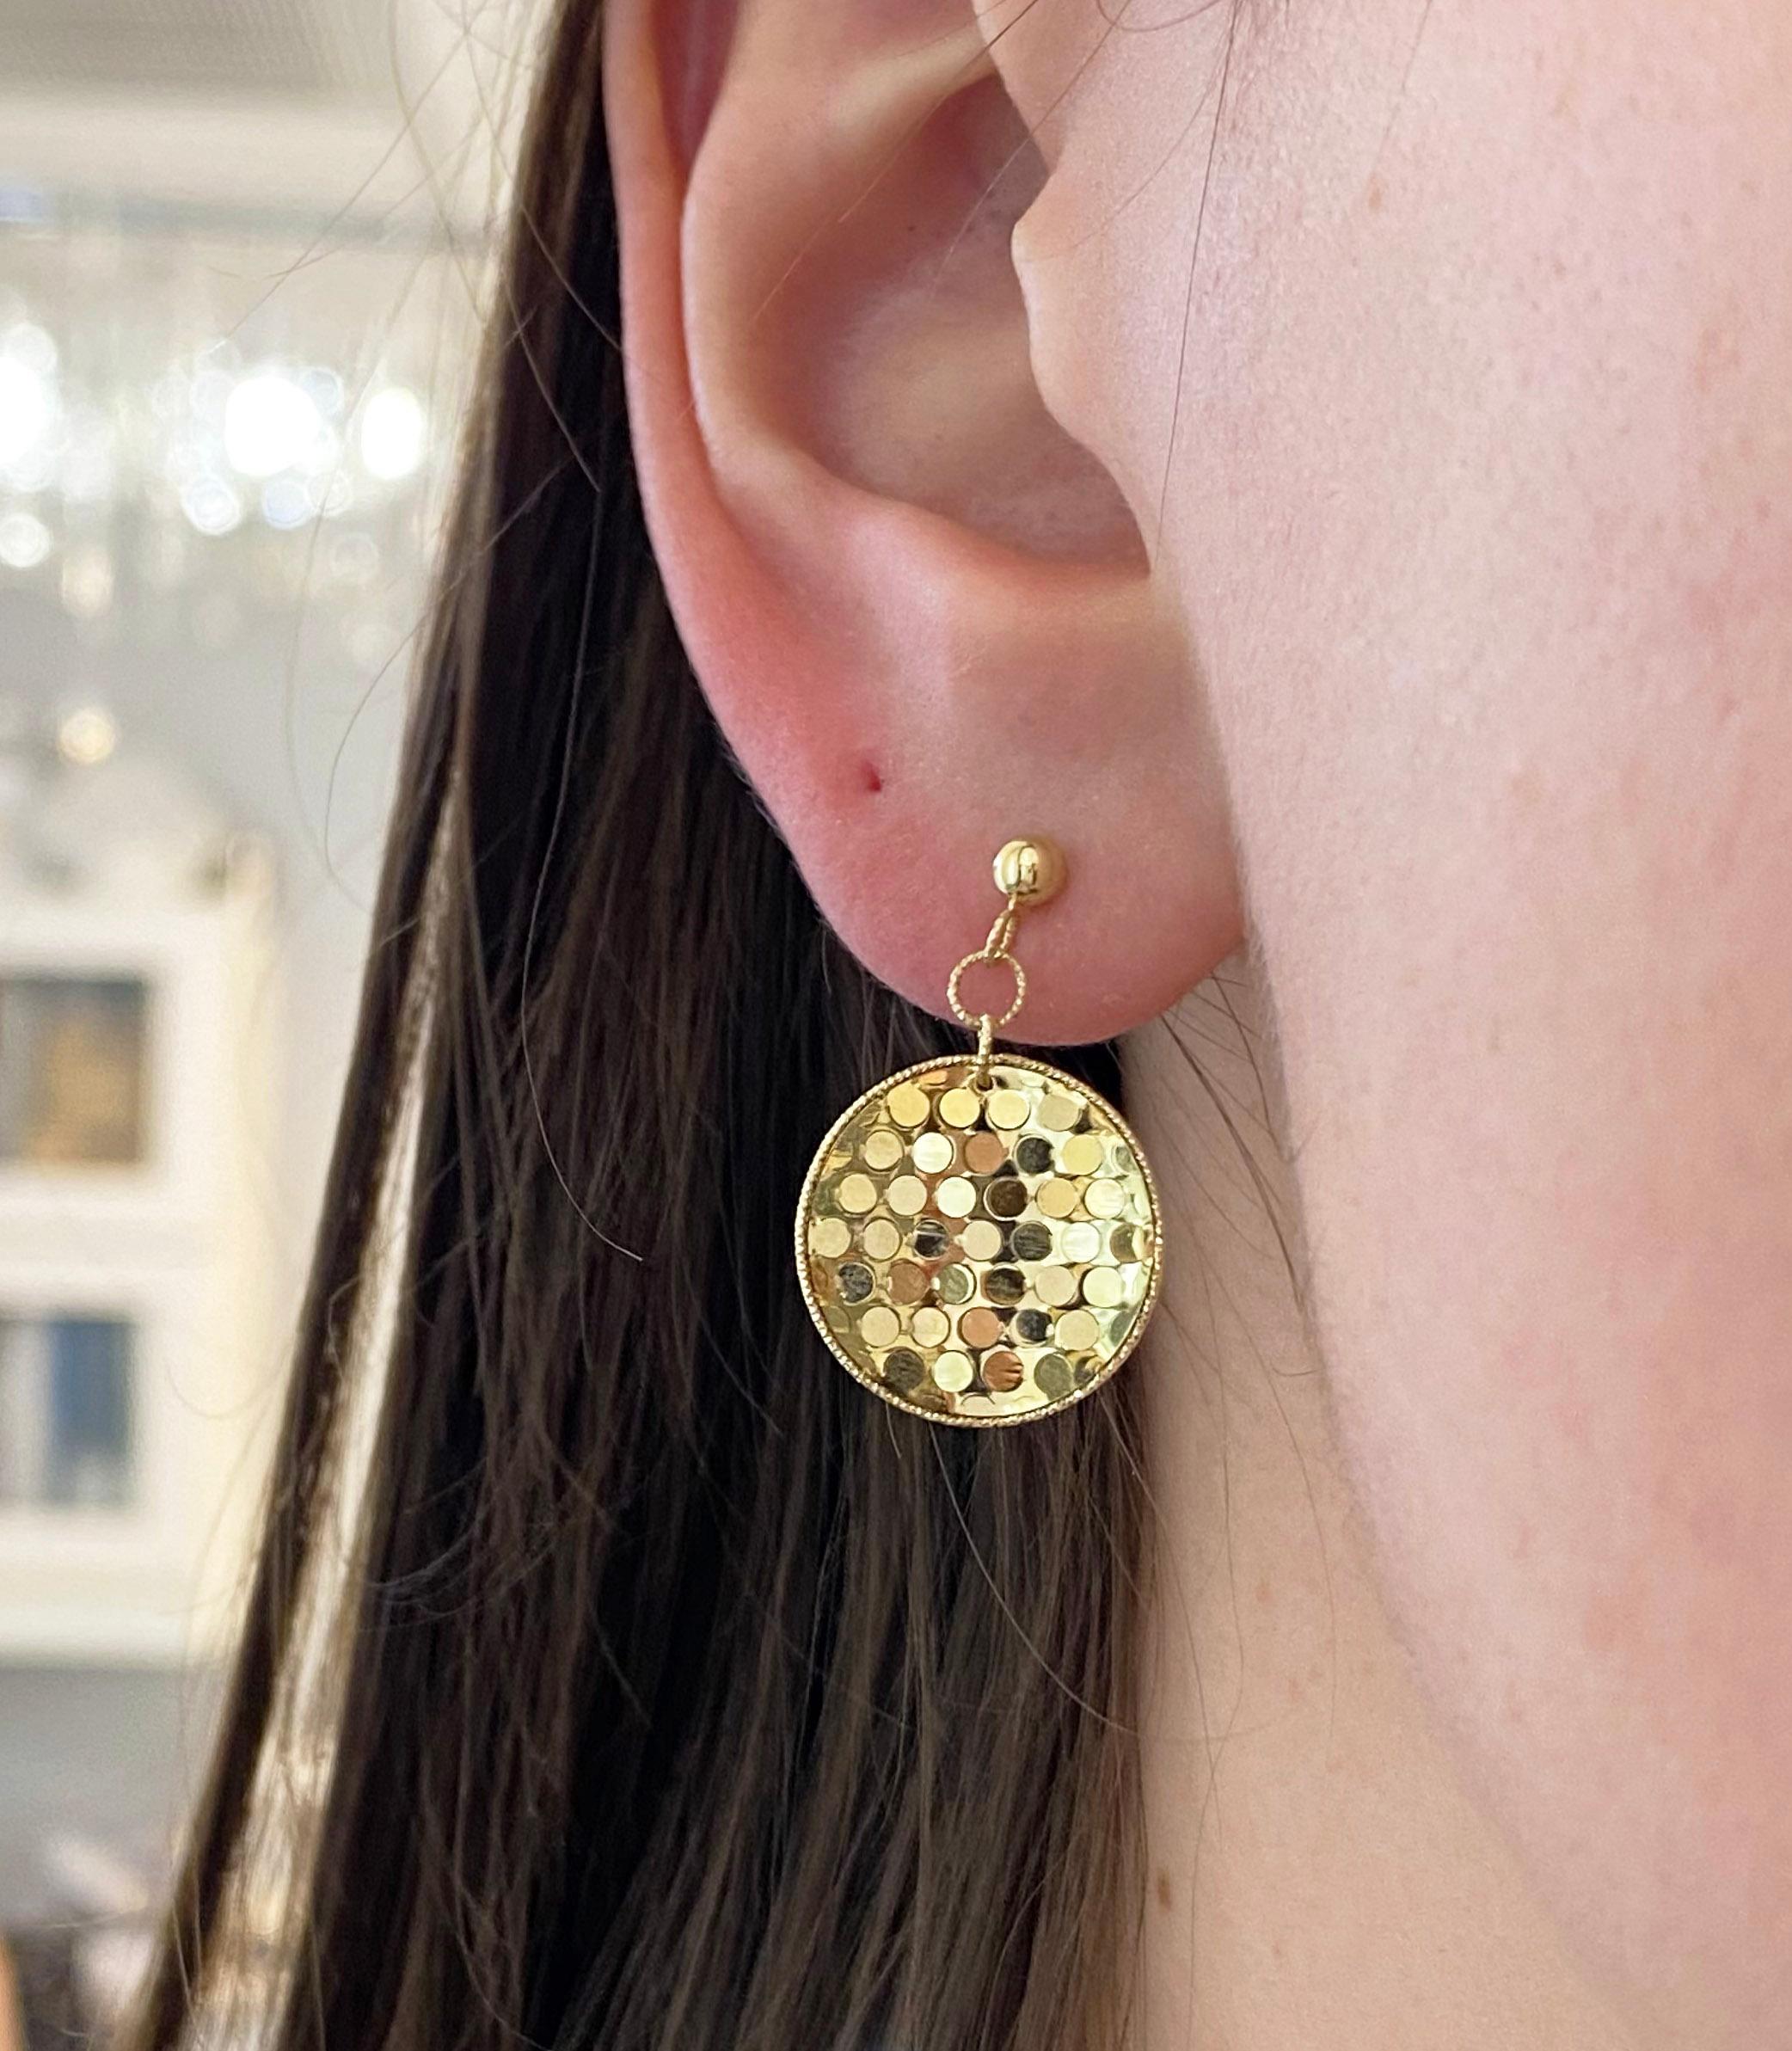 Sparkle and shine this season with our newest earring design! These solid 14 karat yellow gold earrings are designed to reflect light from every angle. The disks shimmer like gold confetti and sparkle on every ear. They are the perfect accessory to